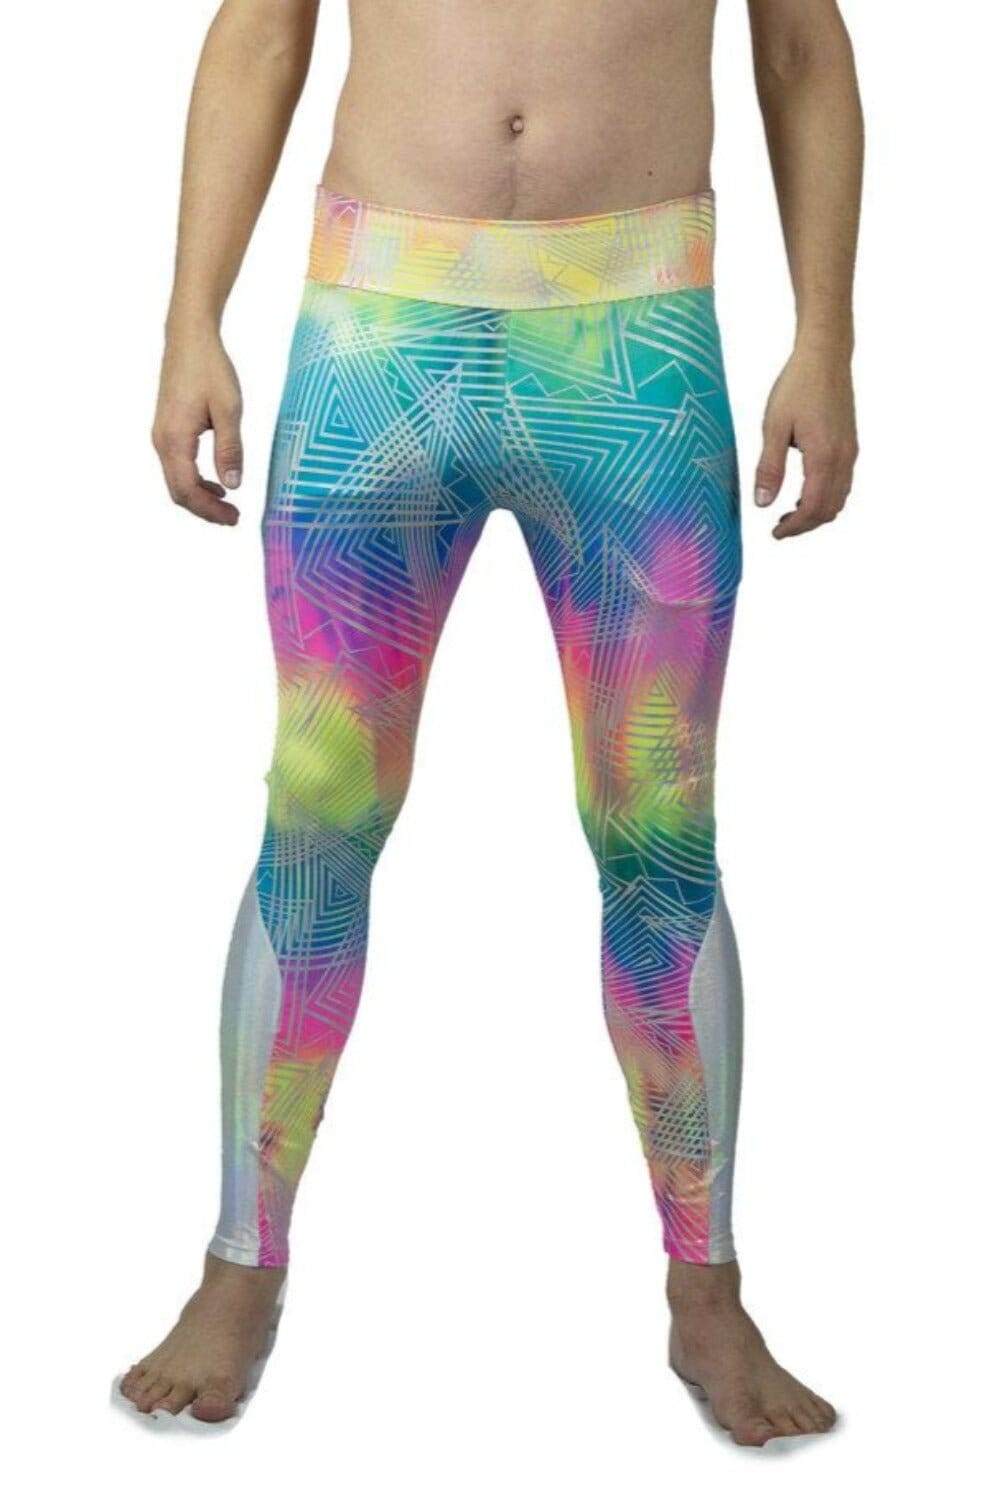 mens rainbow and Holographic silver geometric print festival meggings spandex pants with hidden pockets by Love Khaos